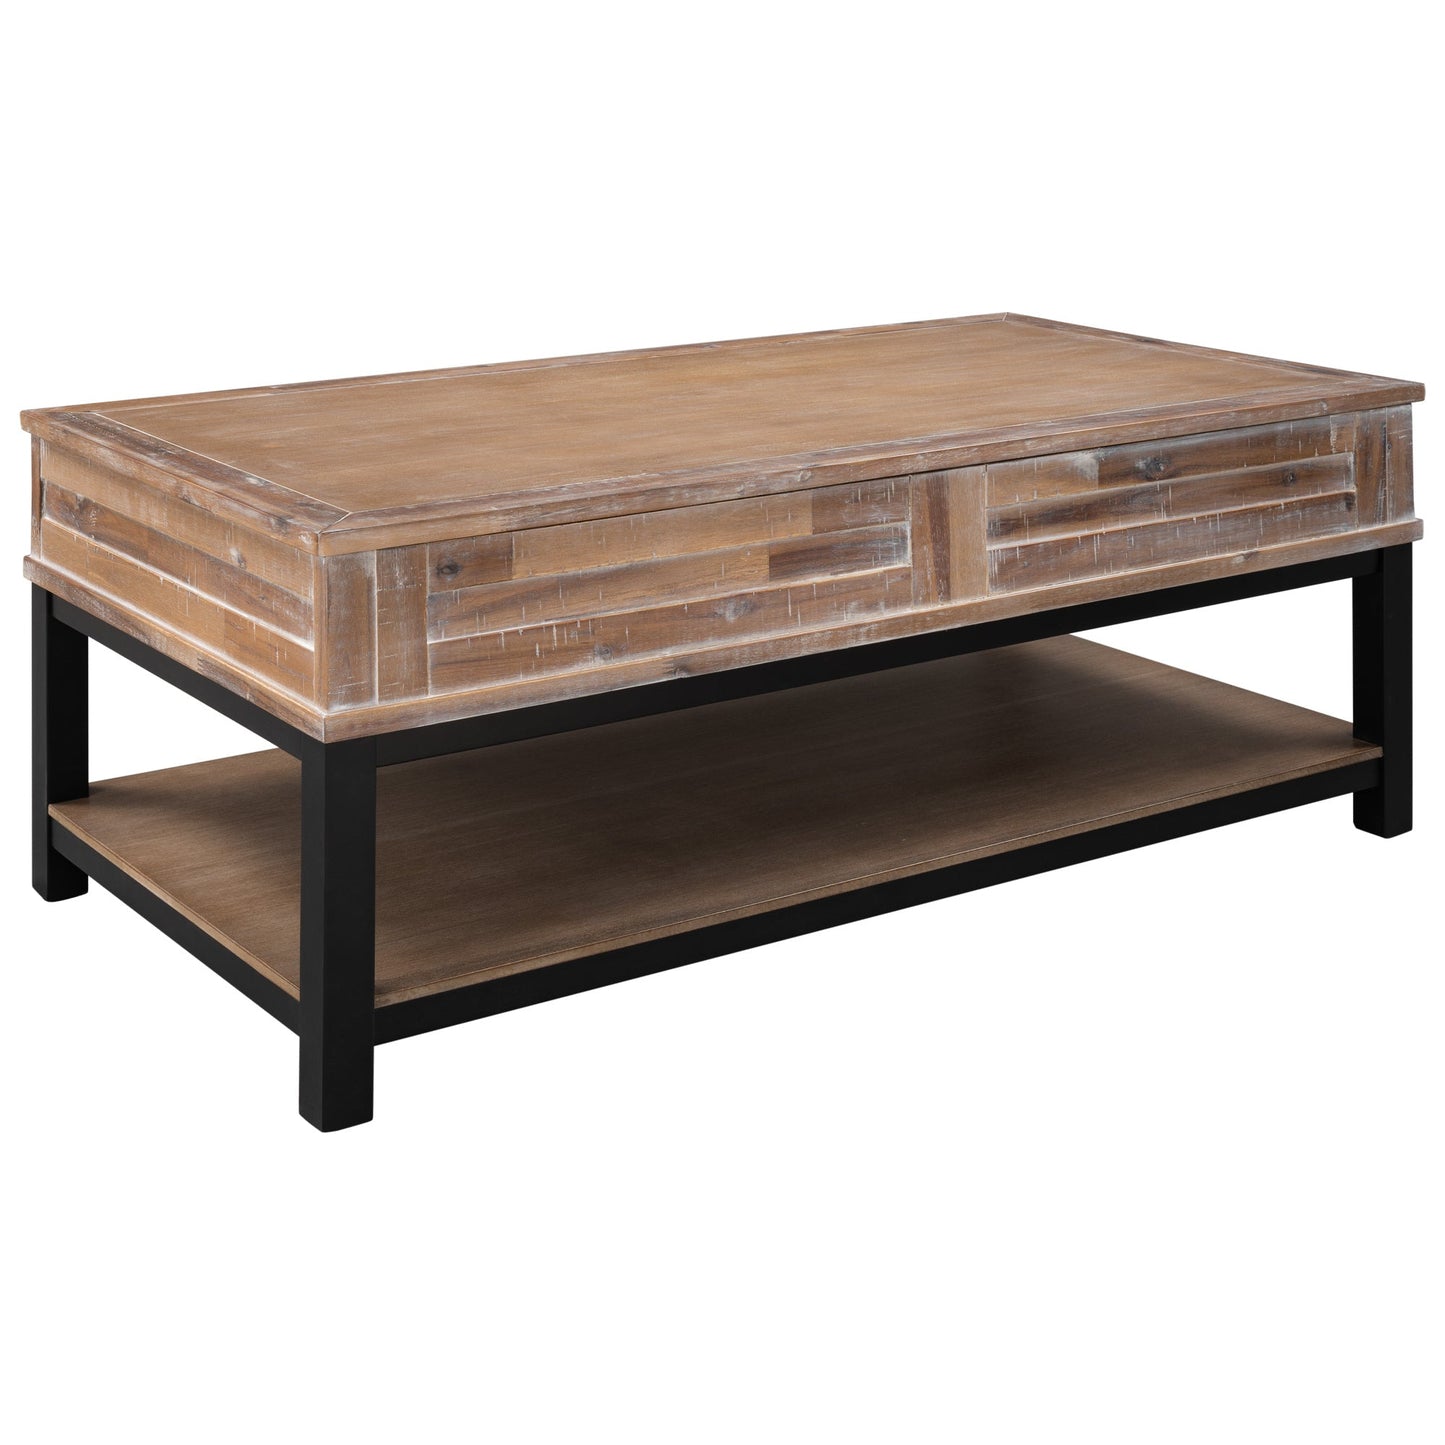 U-style Lift Top Coffee Table with Inner Storage Space and Shelf (As same As WF198291AAN) Home Decor by Design